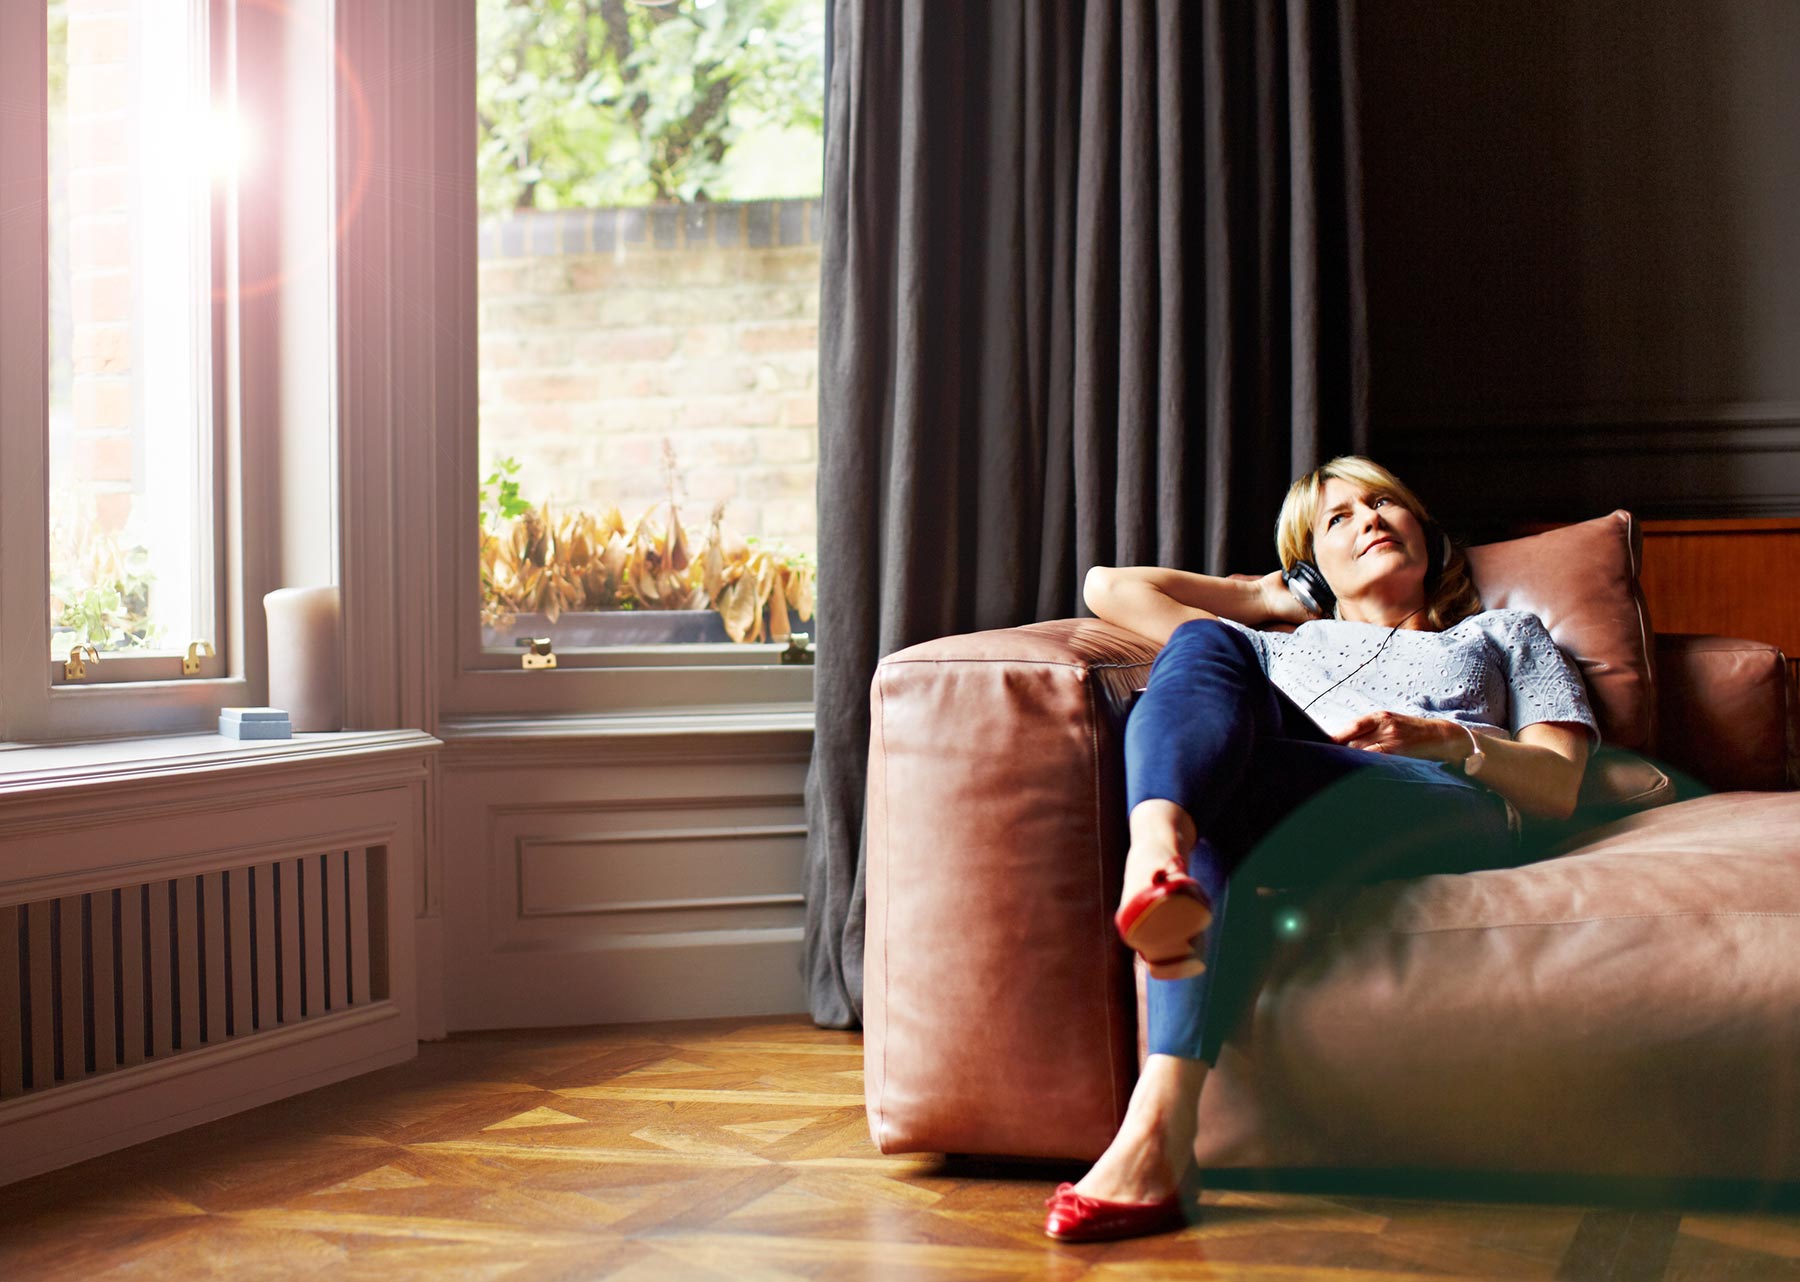 Woman lounging on comfy sofa listening to music